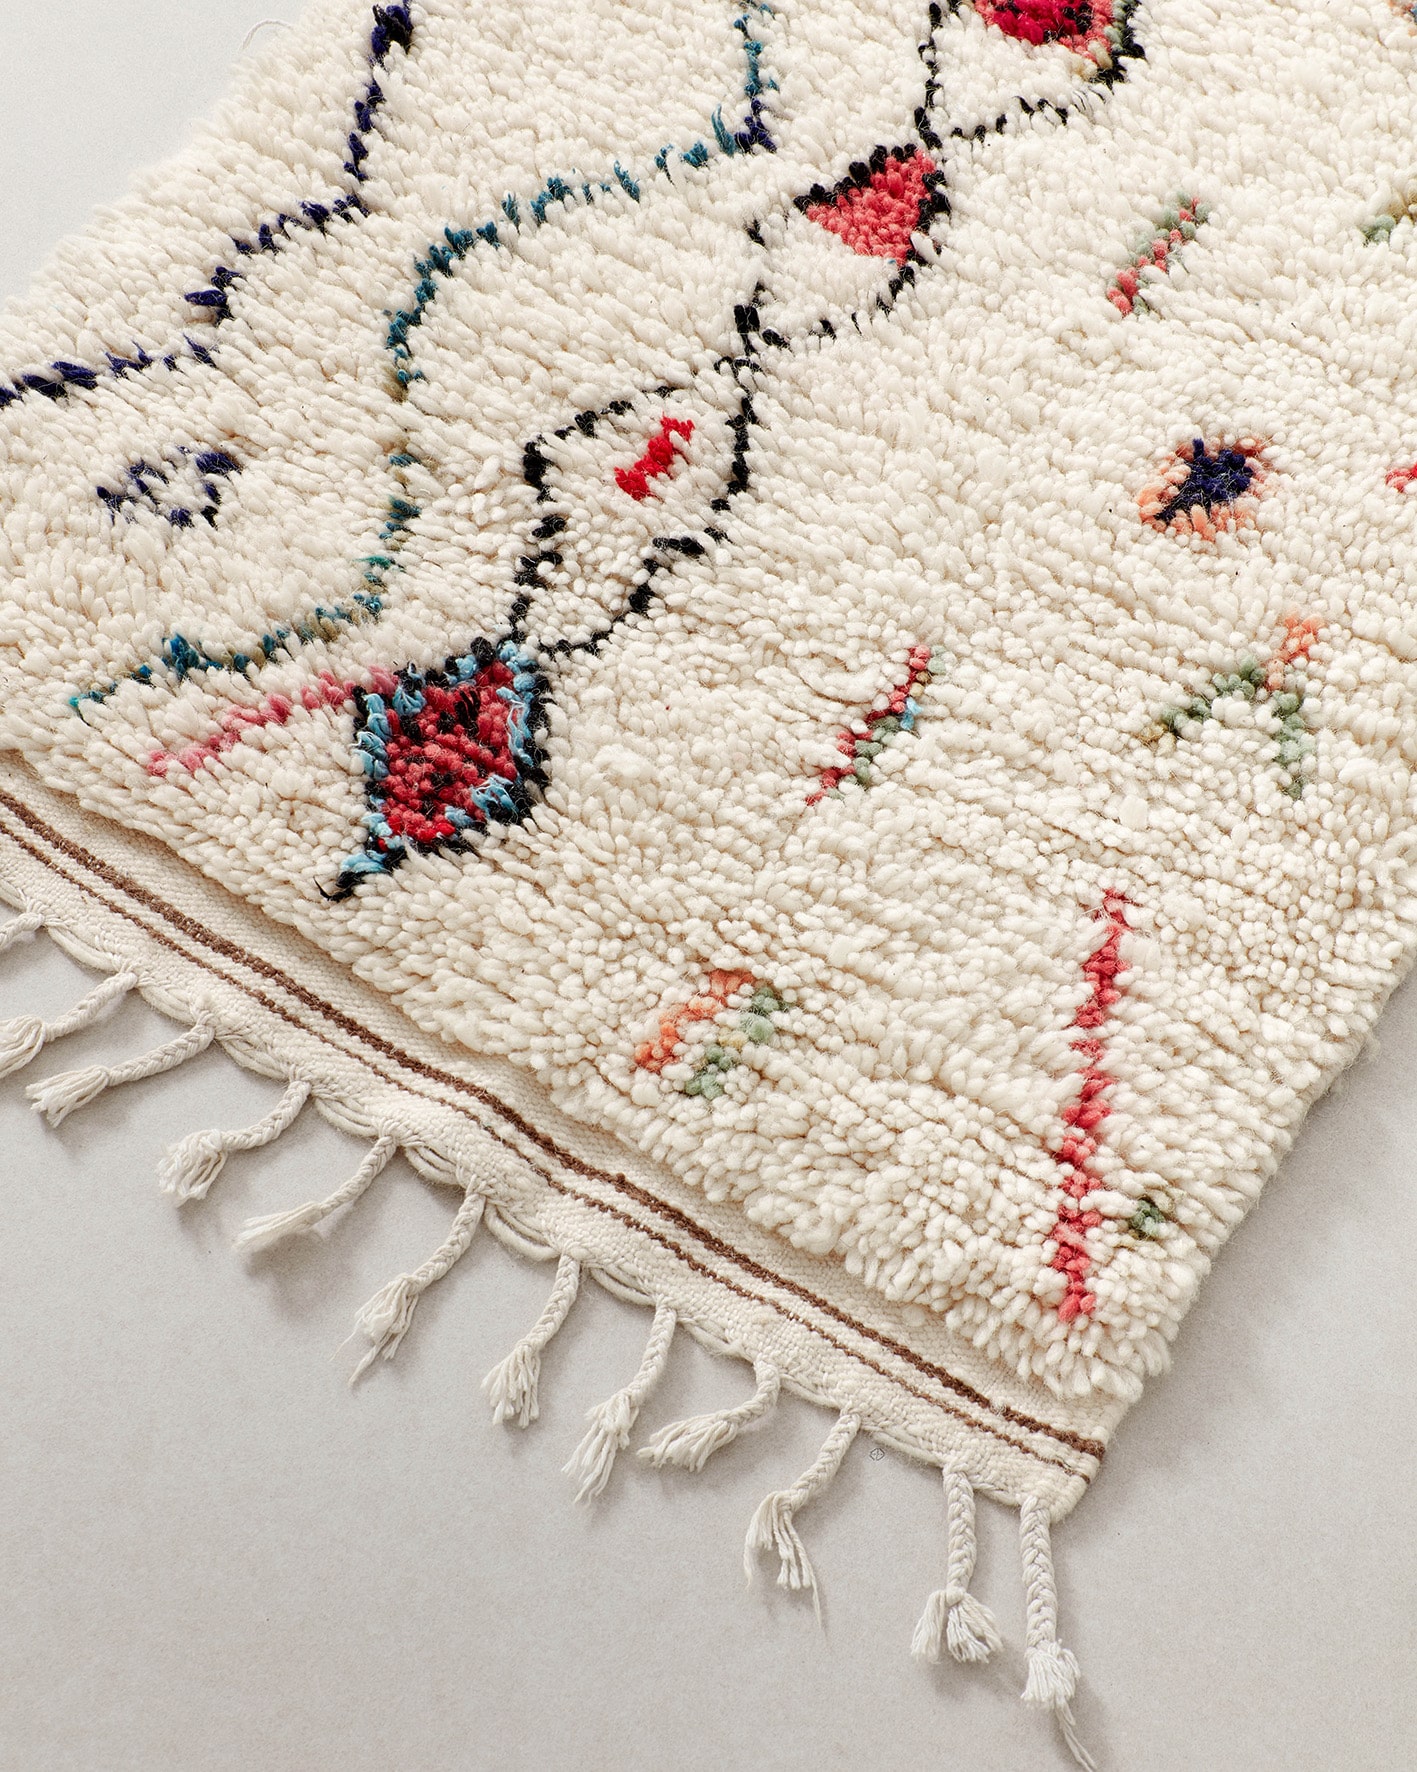 Tiny rug with abstract line drawings, fringe